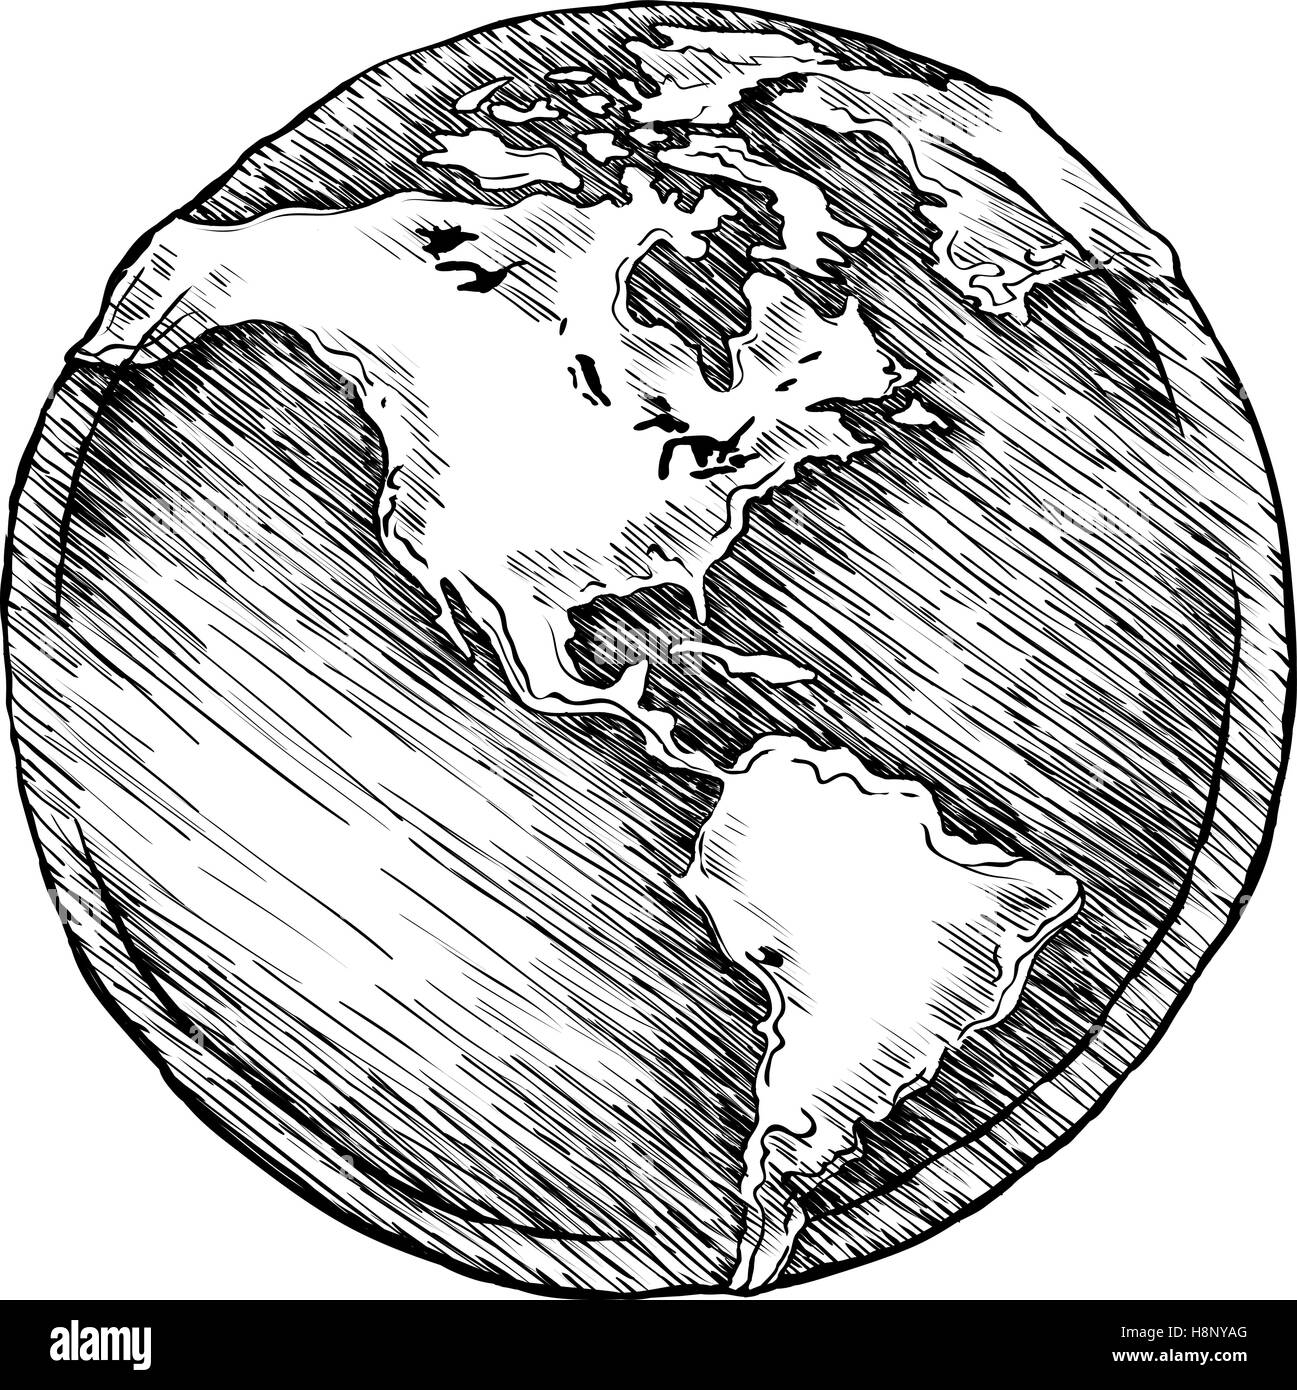 Glass City by redguard on DeviantArt  Globe drawing Pencil illustration  Drawings